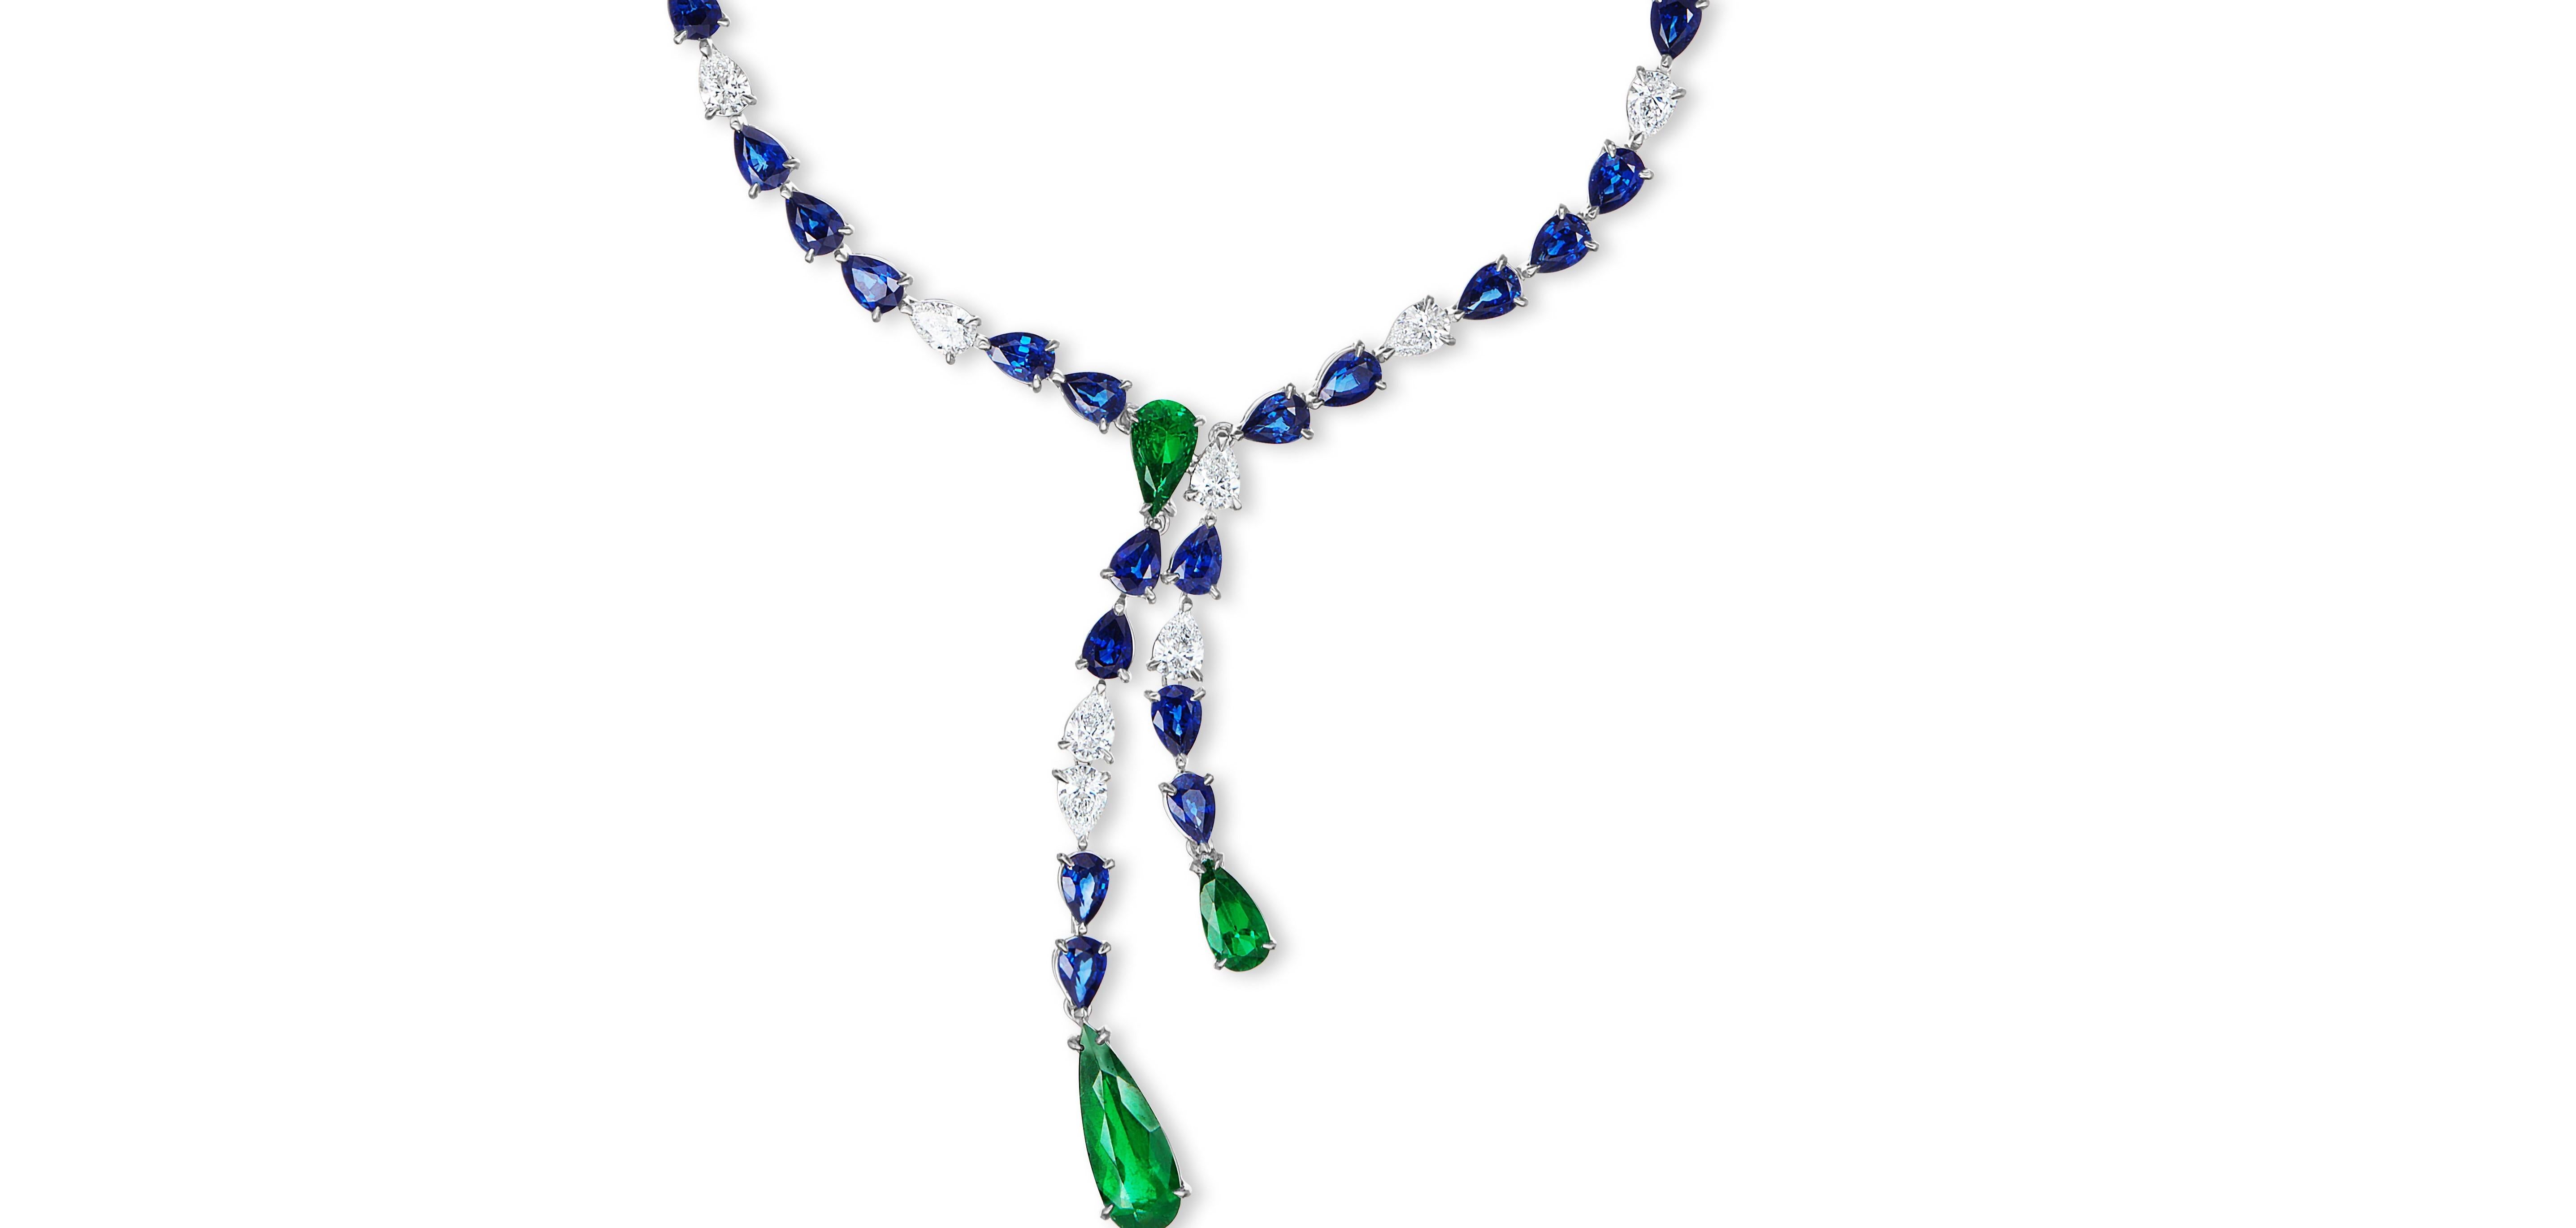 Pear Shaped Emerald, Sapphire and Diamond Necklace. This Necklace is part of a Suite and can be purchased individually.

Striking necklace and color combination. The gorgeous Colombian Emeralds matched with the beautiful Ceylon Sapphires play as if